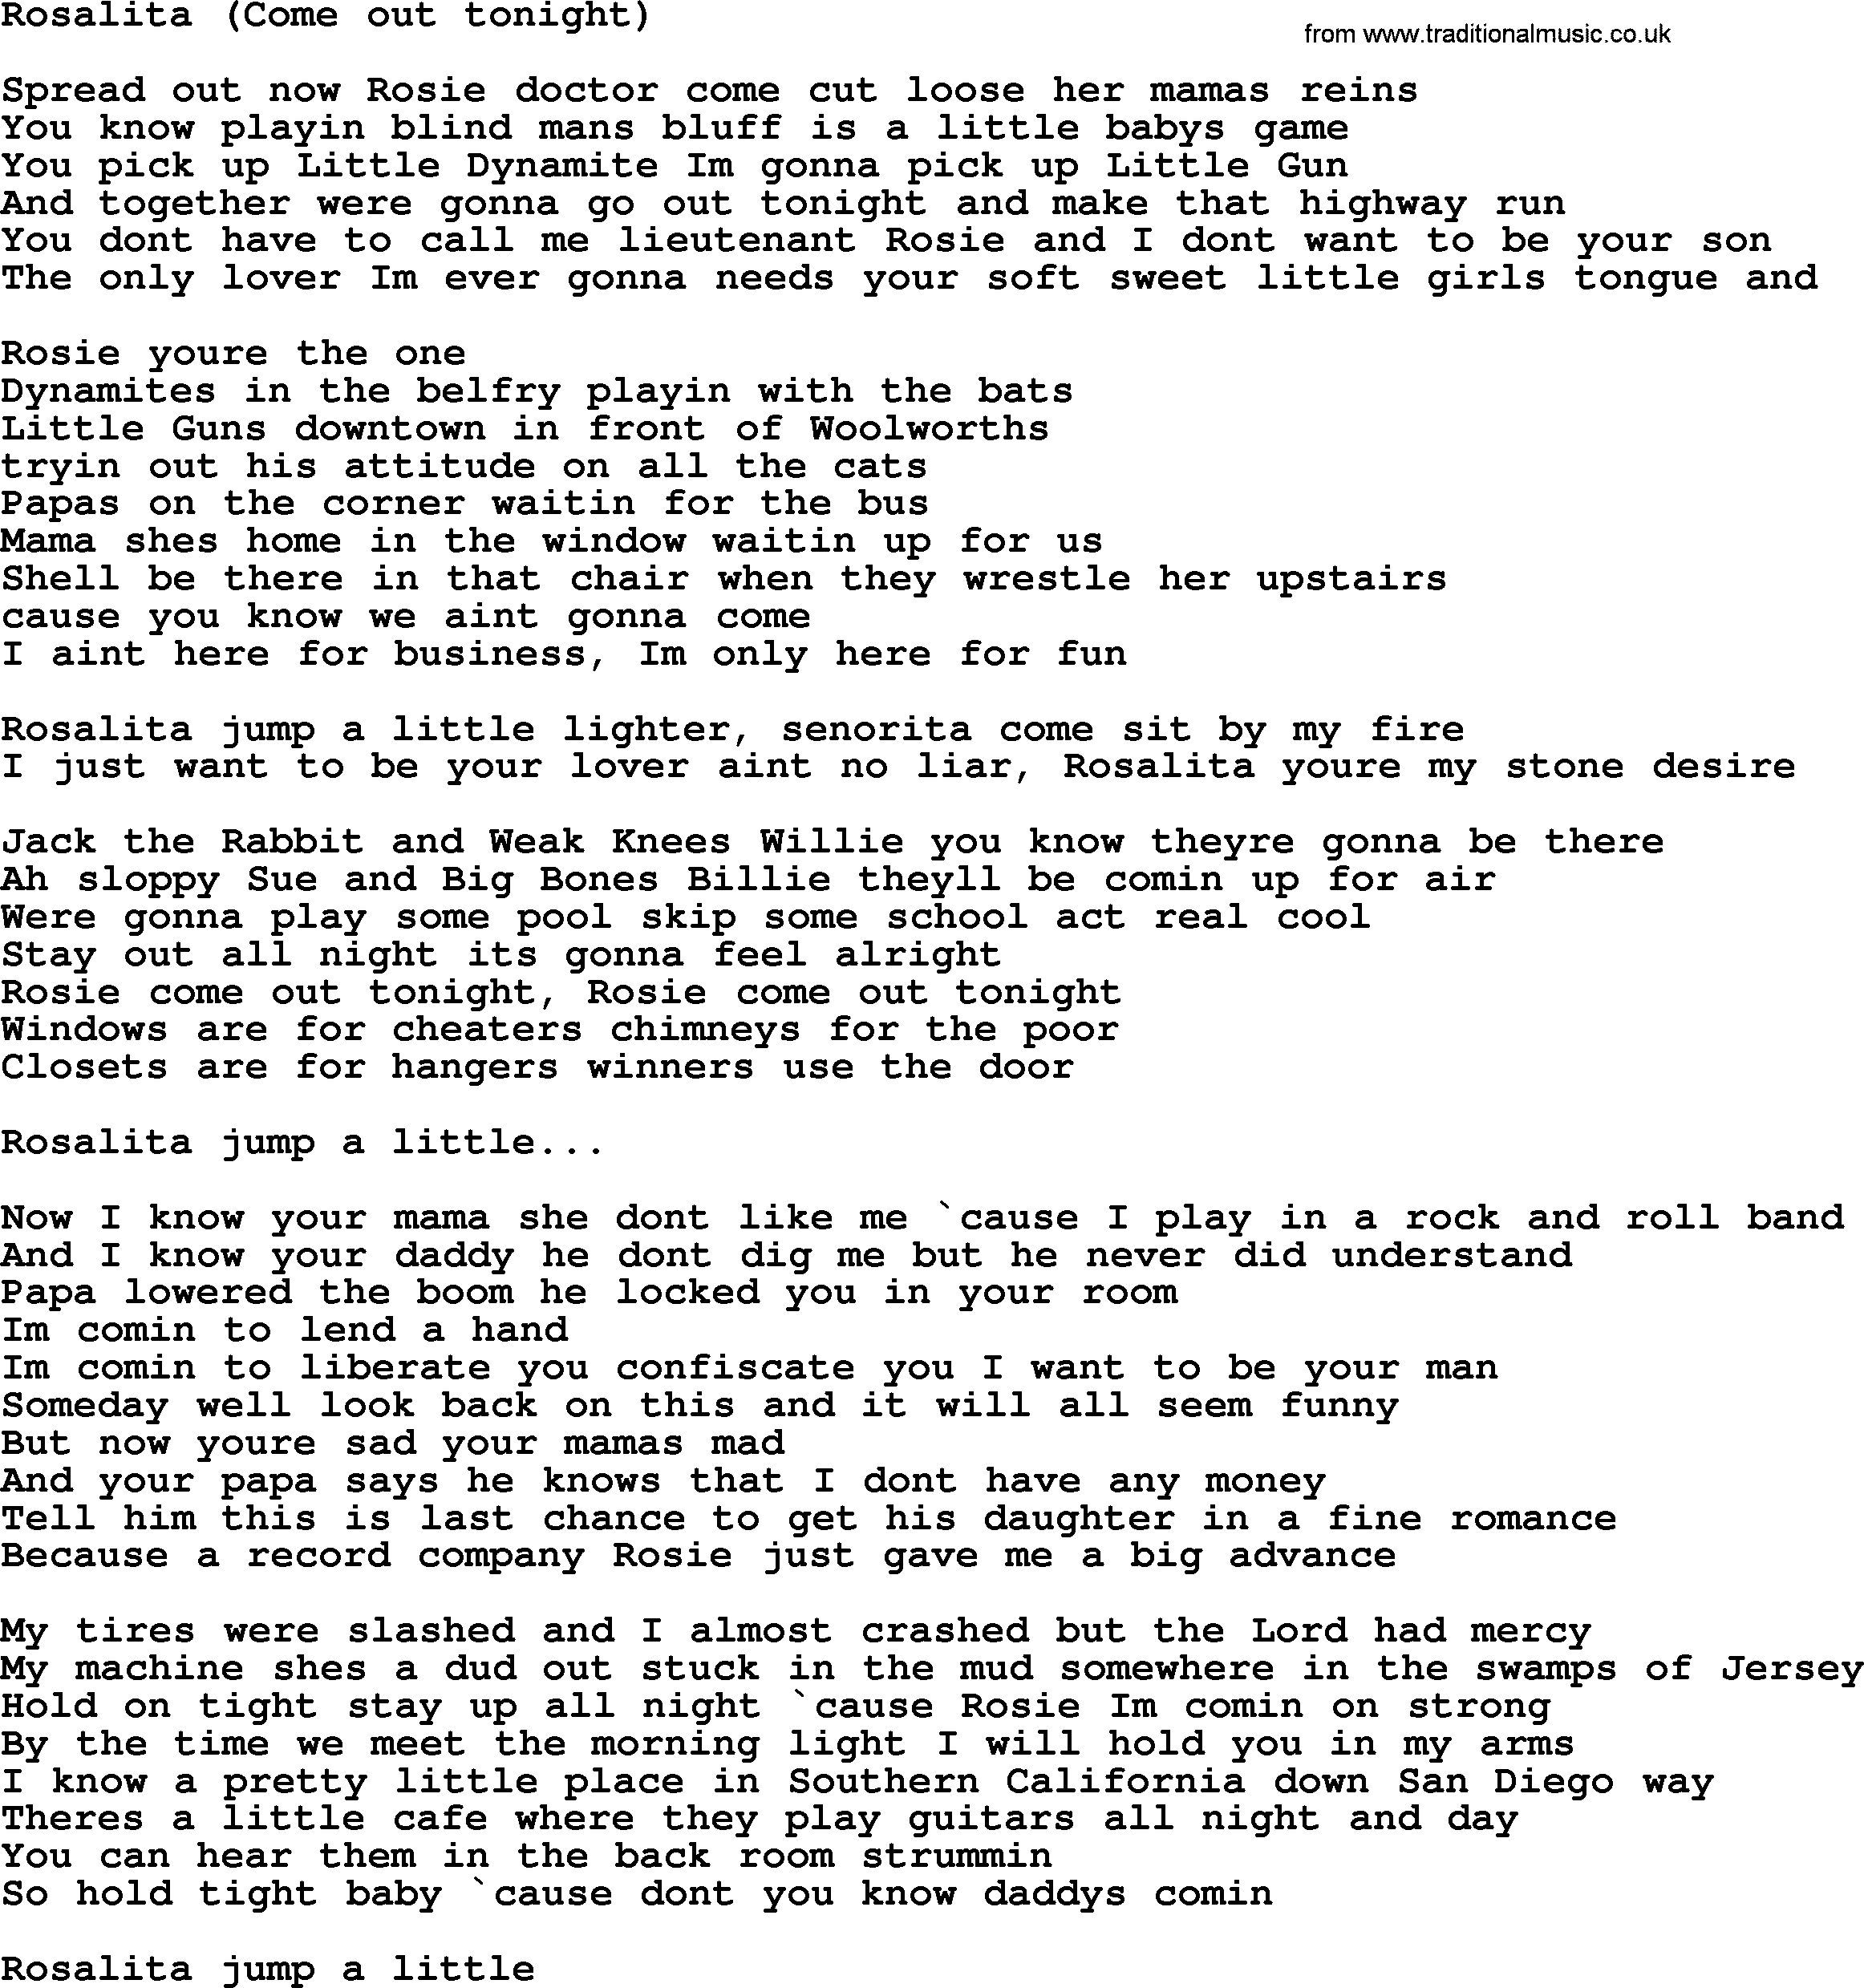 Bruce Springsteen song: Rosalita(Come Out Tonight) lyrics